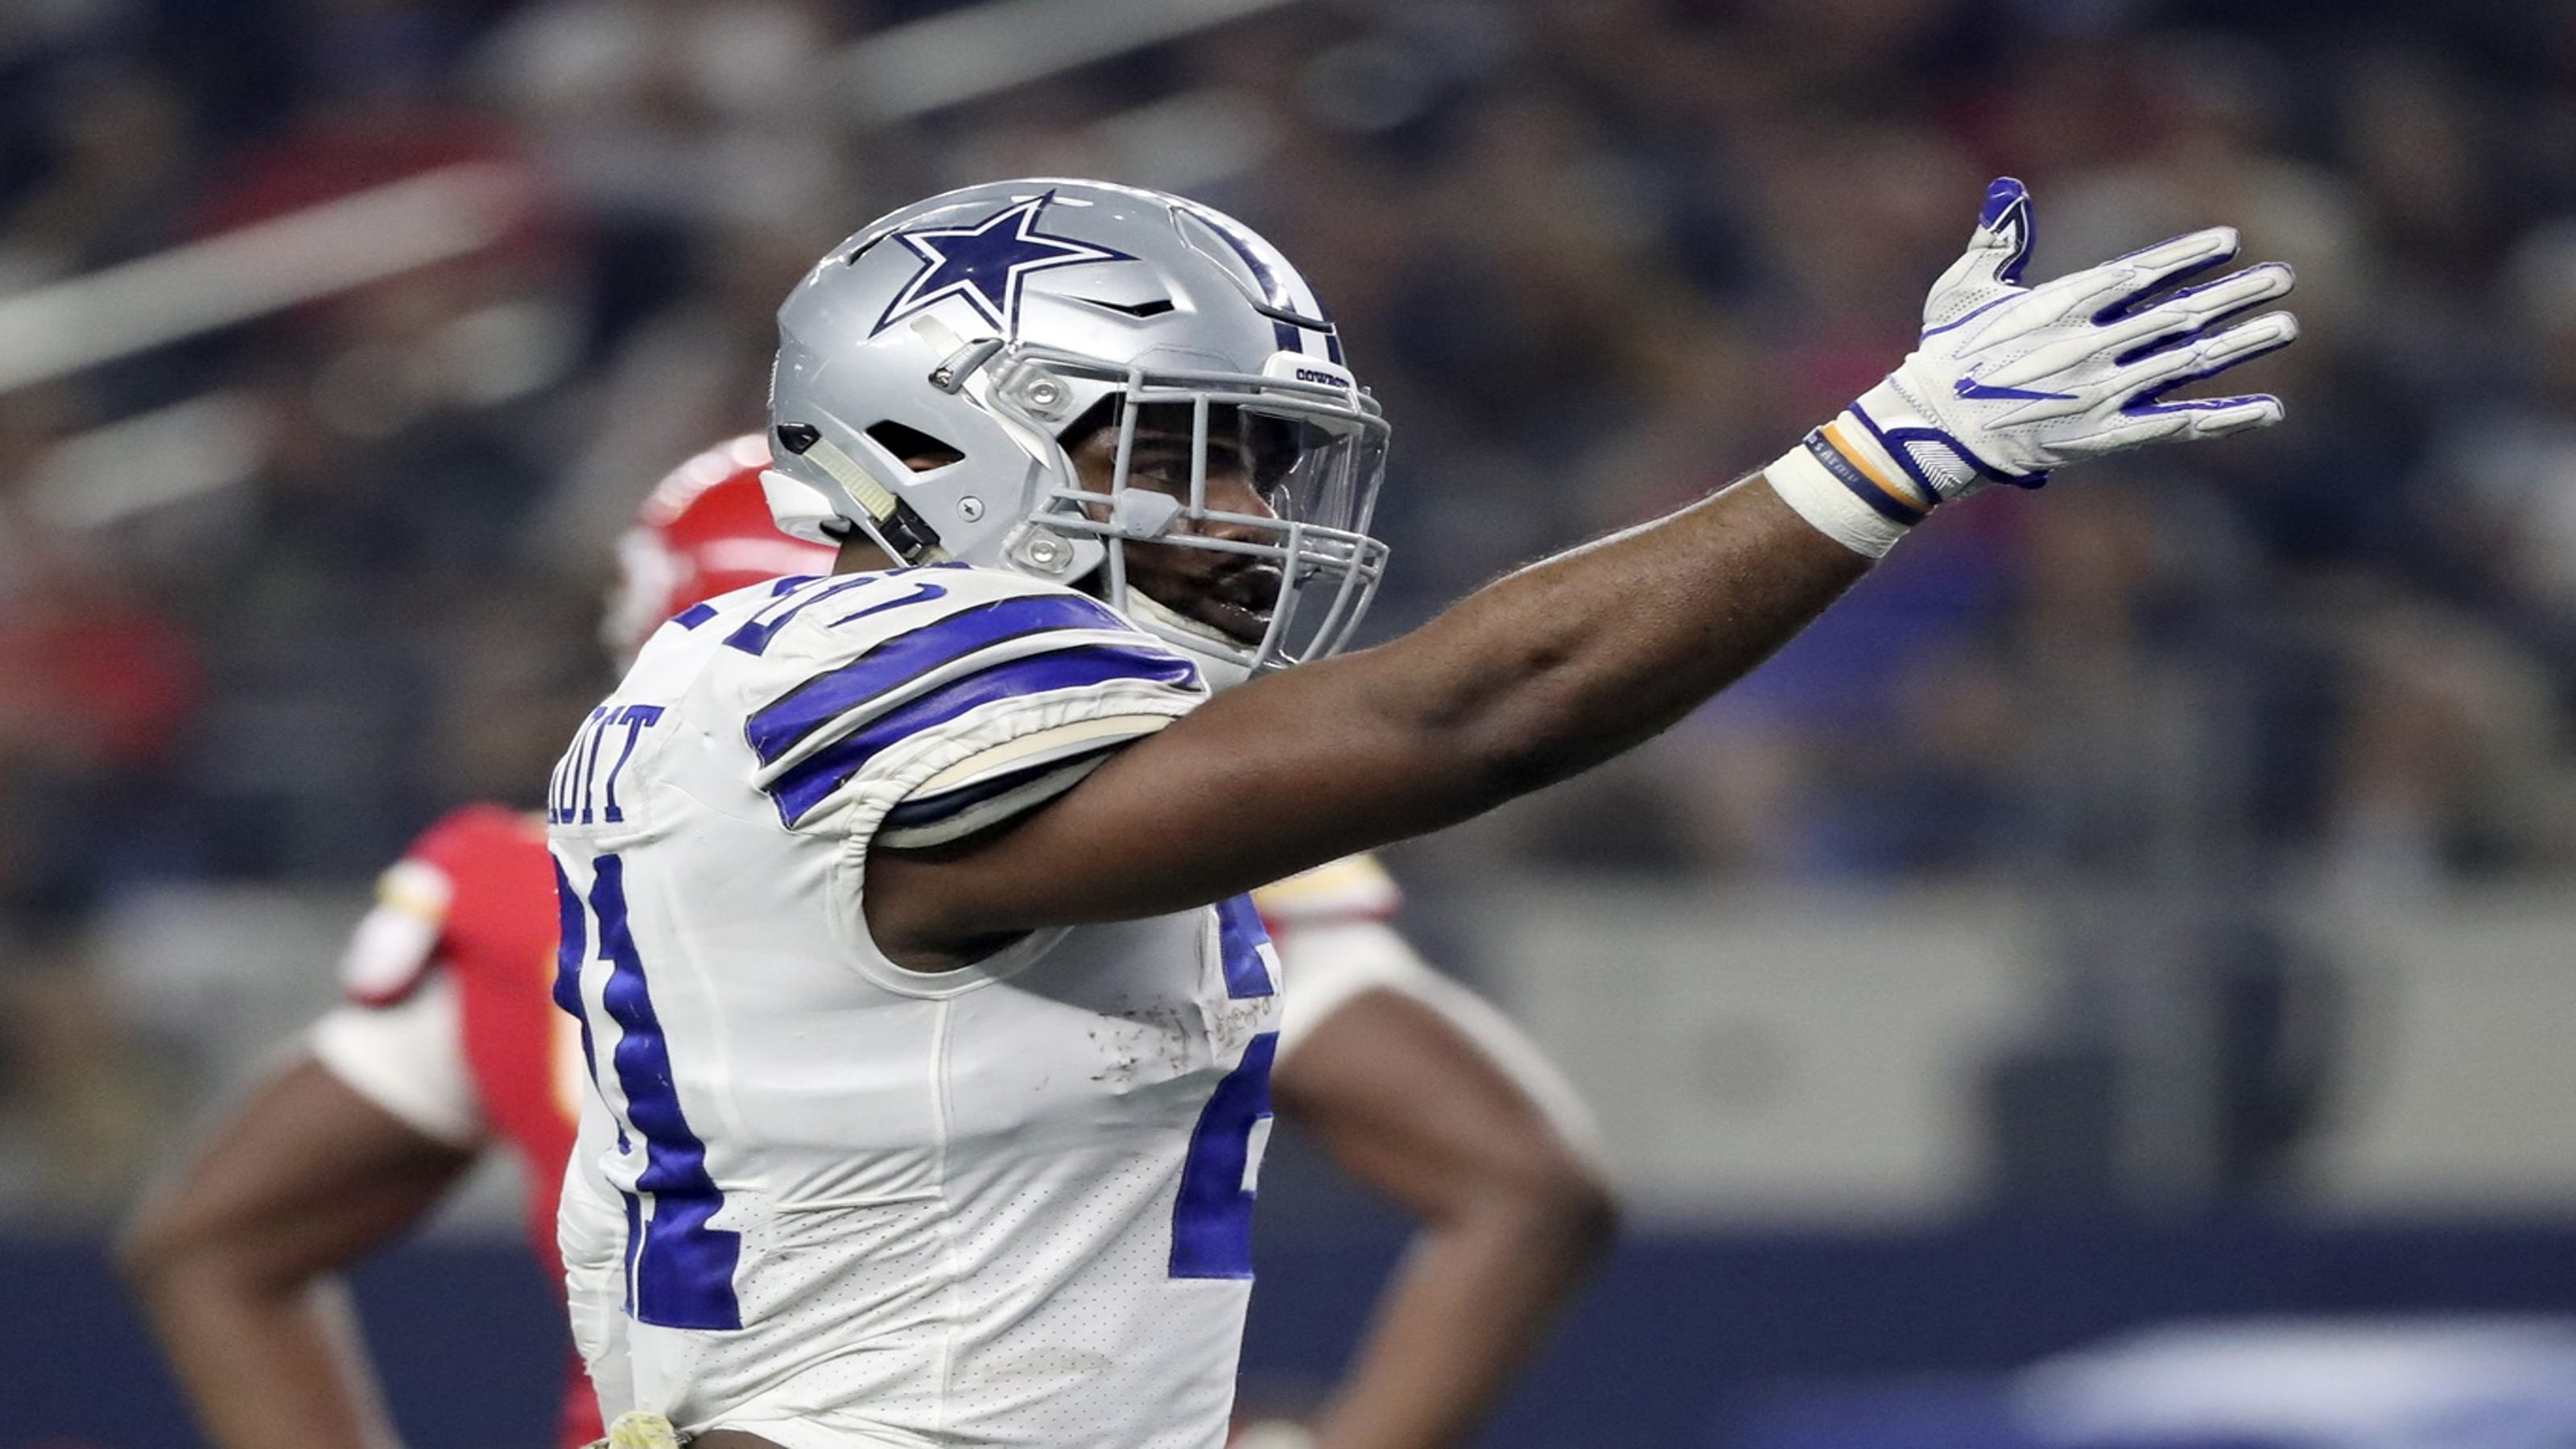 NFL camp report: Can Zeke Elliott carry Cowboys to playoffs?